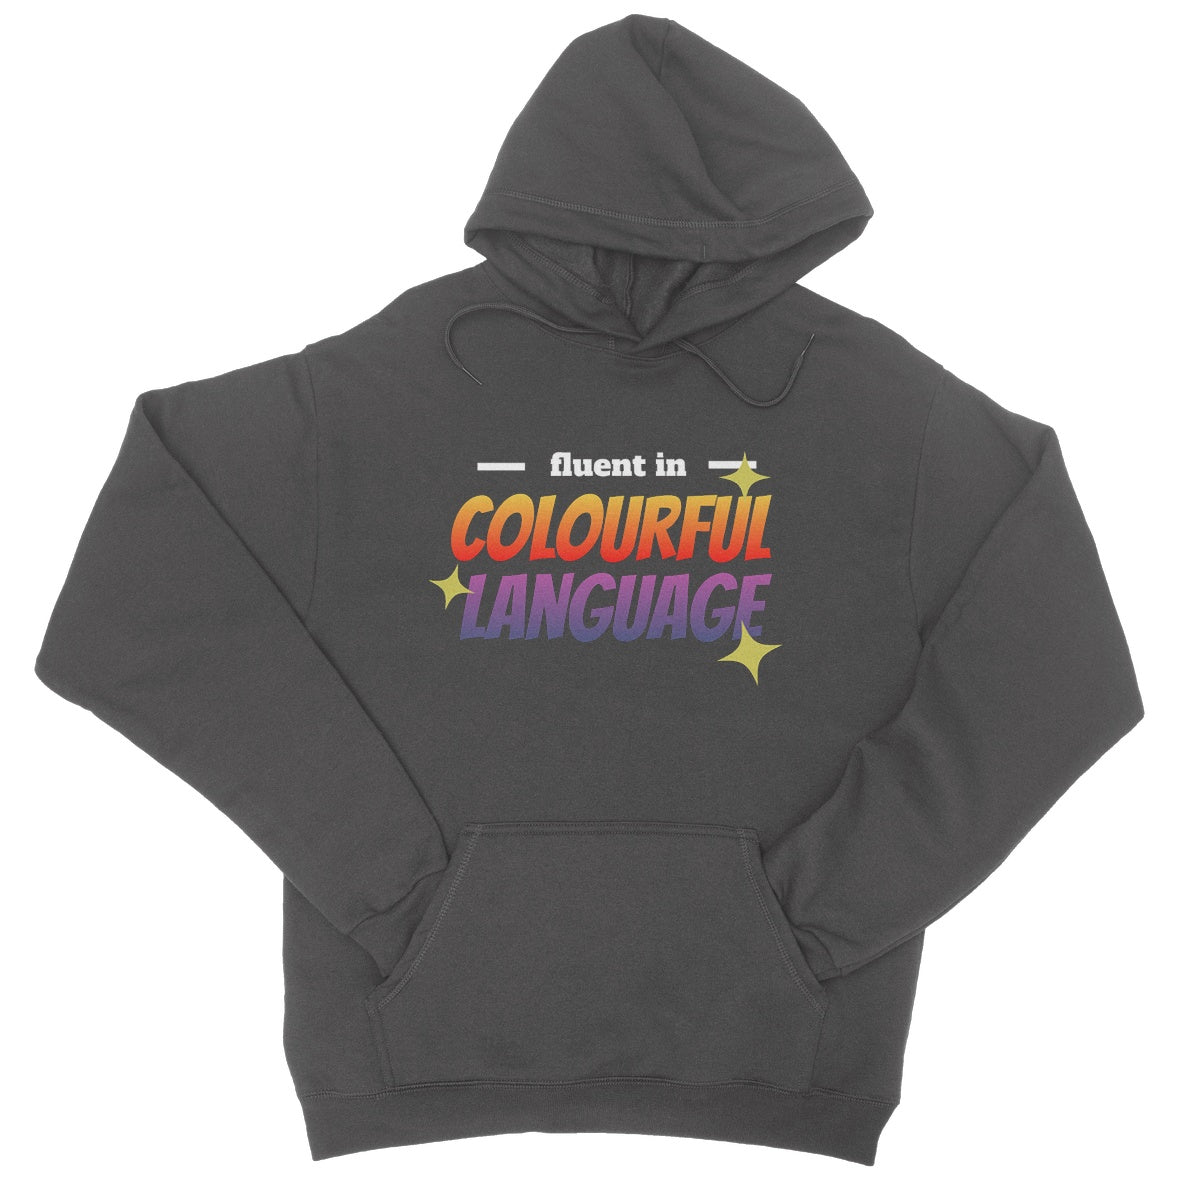 fluent in colourful language hoodie grey